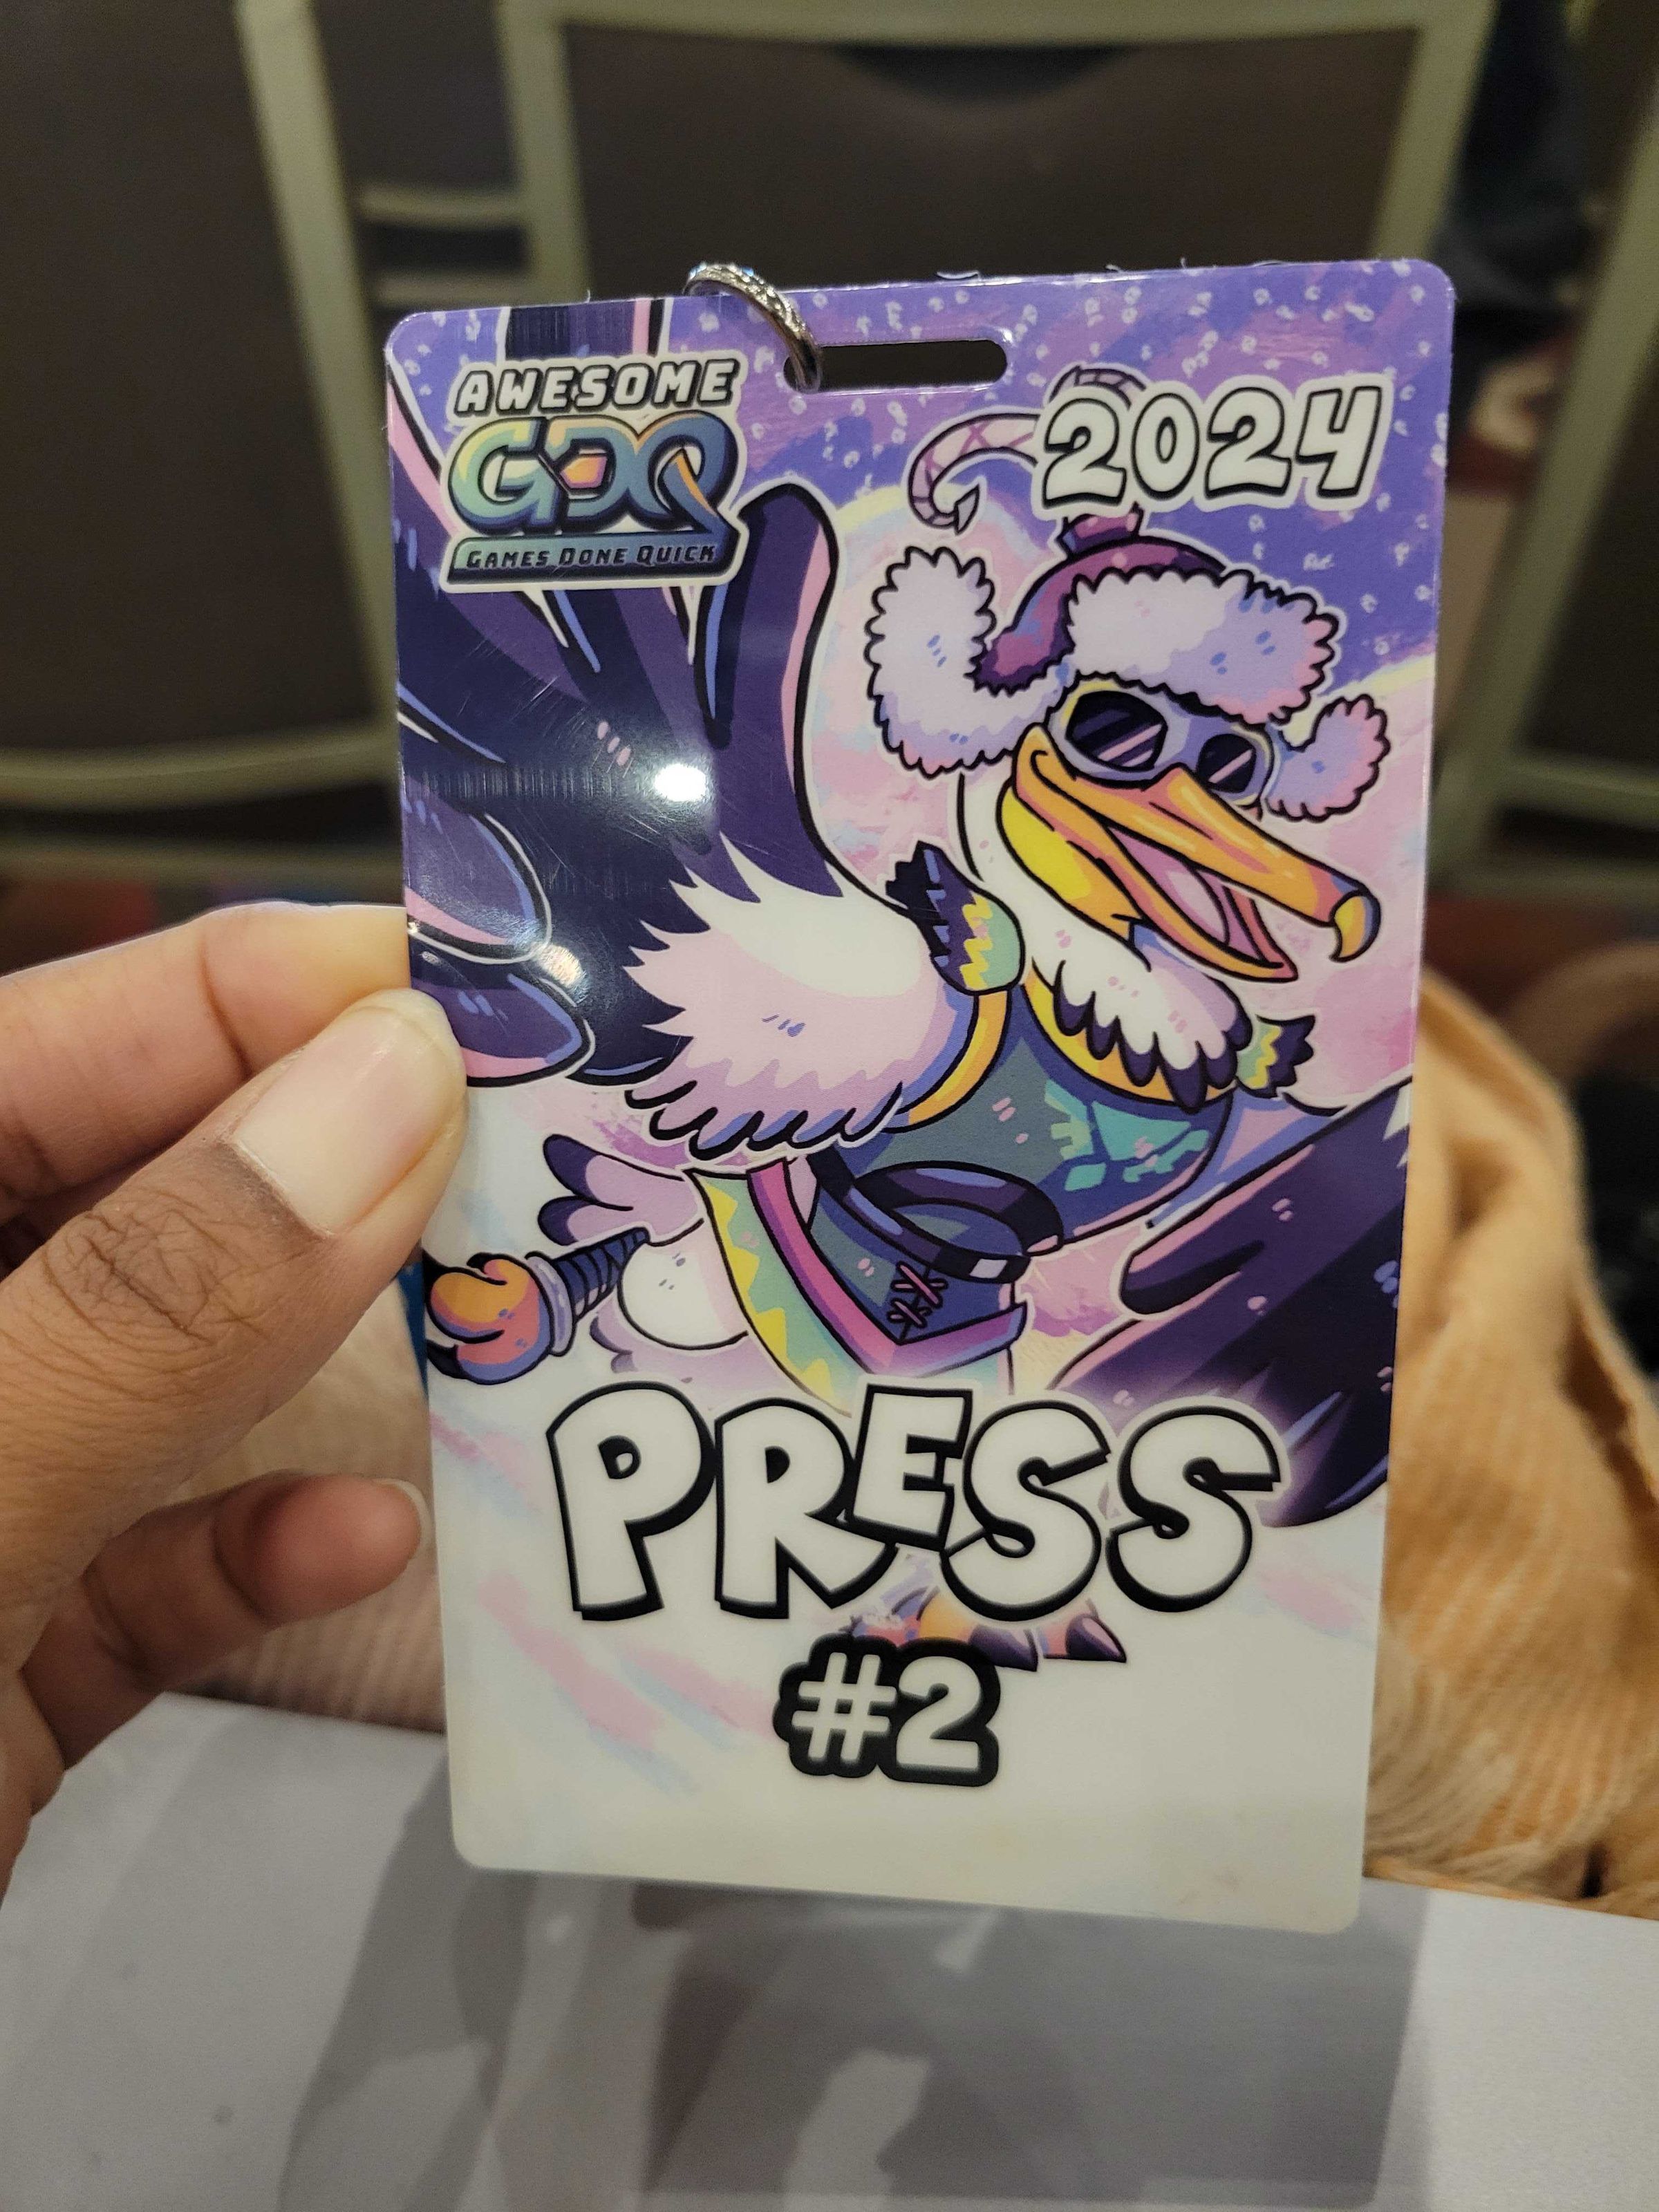 Photo of Games Done Quick 2024’s press badge featuring Penn from The Legend of Zelda: Tears of the Kingdom.